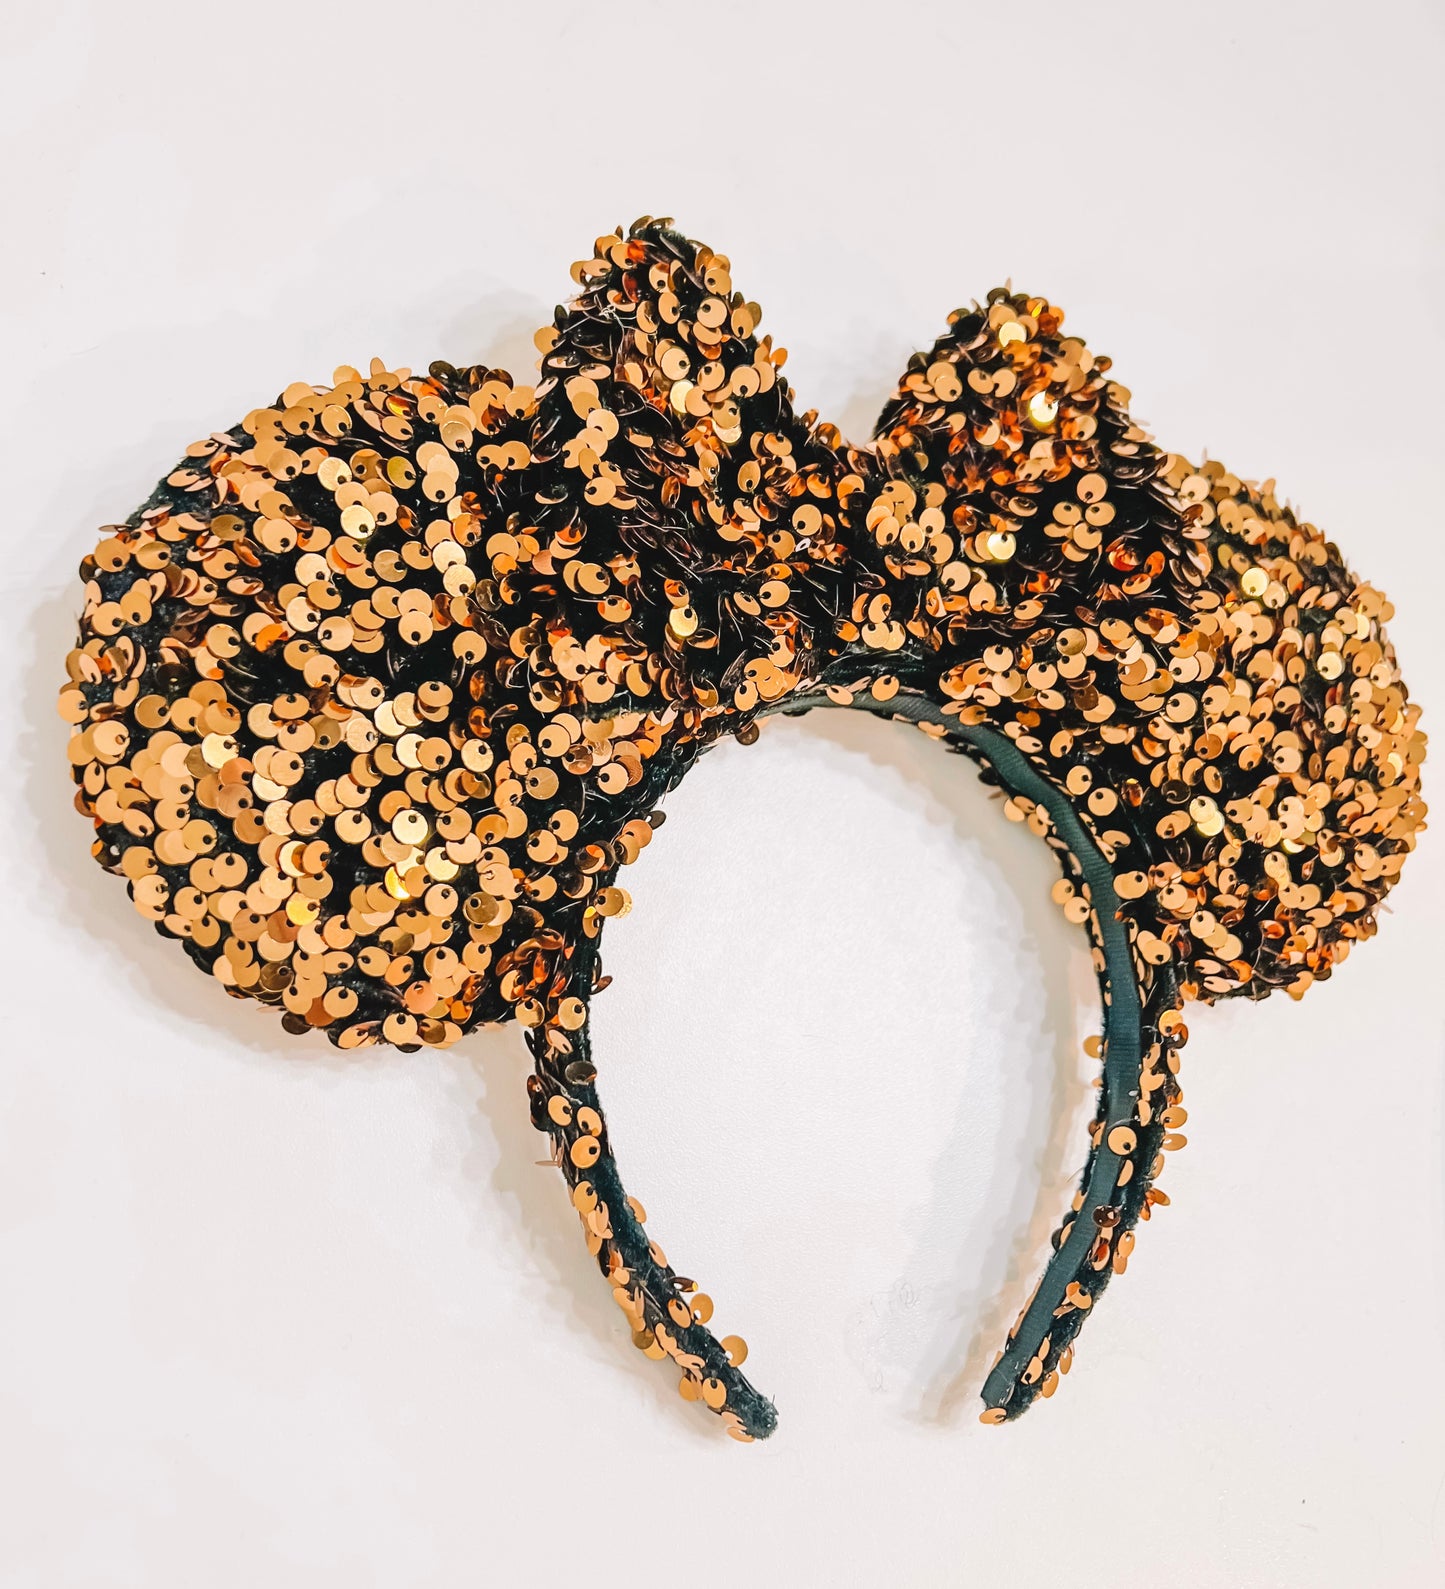 New Years Mouse Ears!